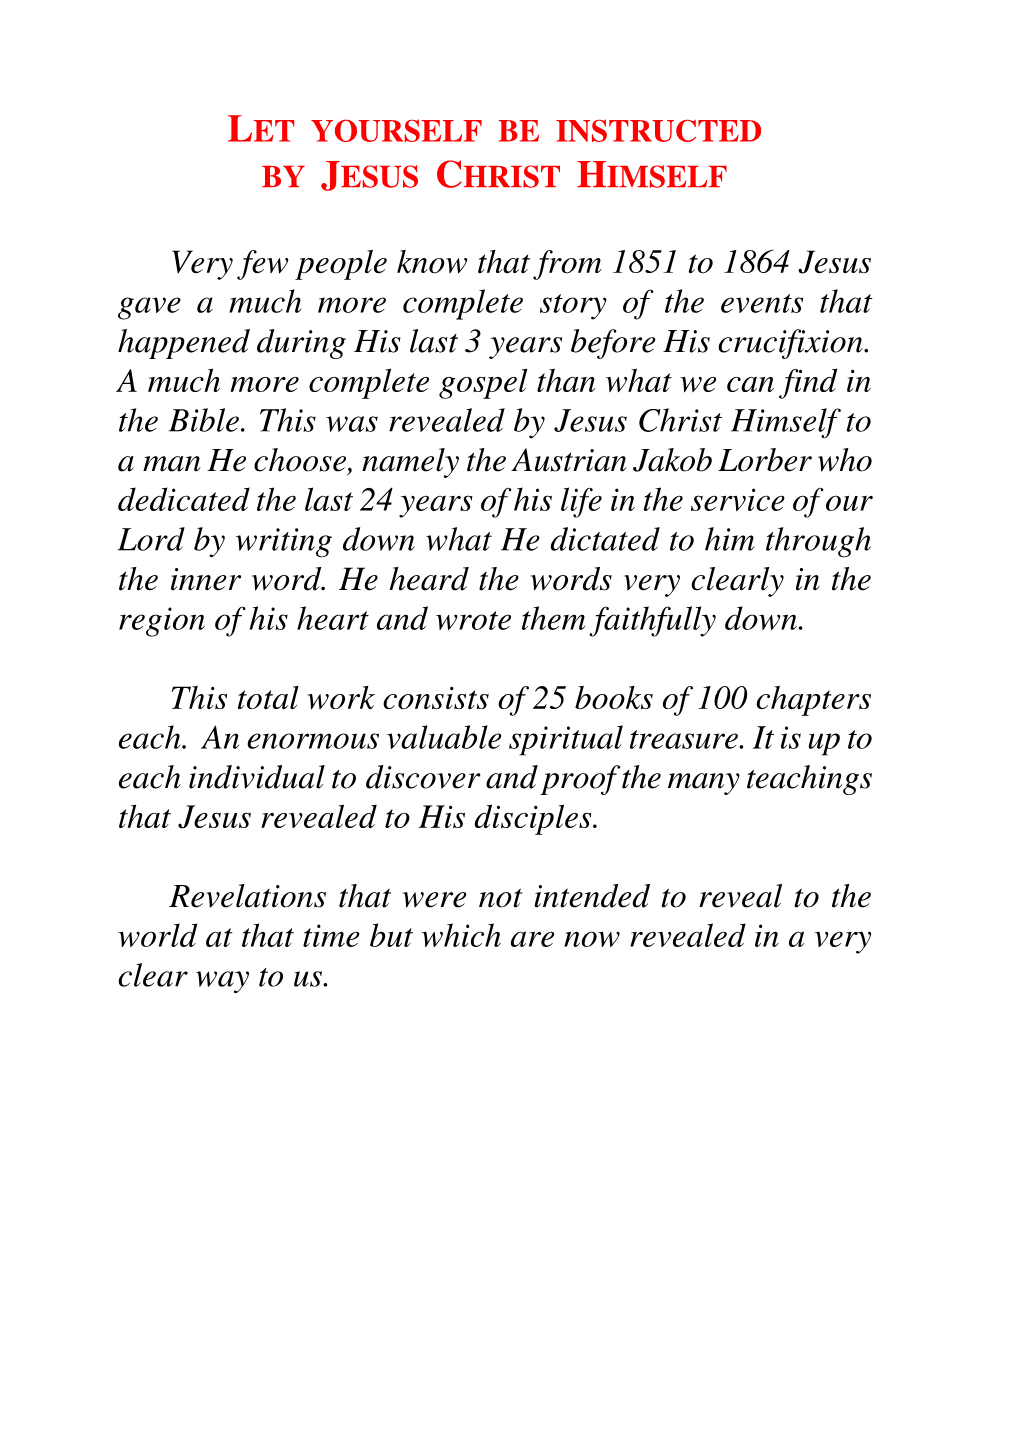 Very Few People Know That from 1851 to 1864 Jesus Gave a Much More Complete Story of the Events That Happened During His Last 3 Years Before His Crucifixion